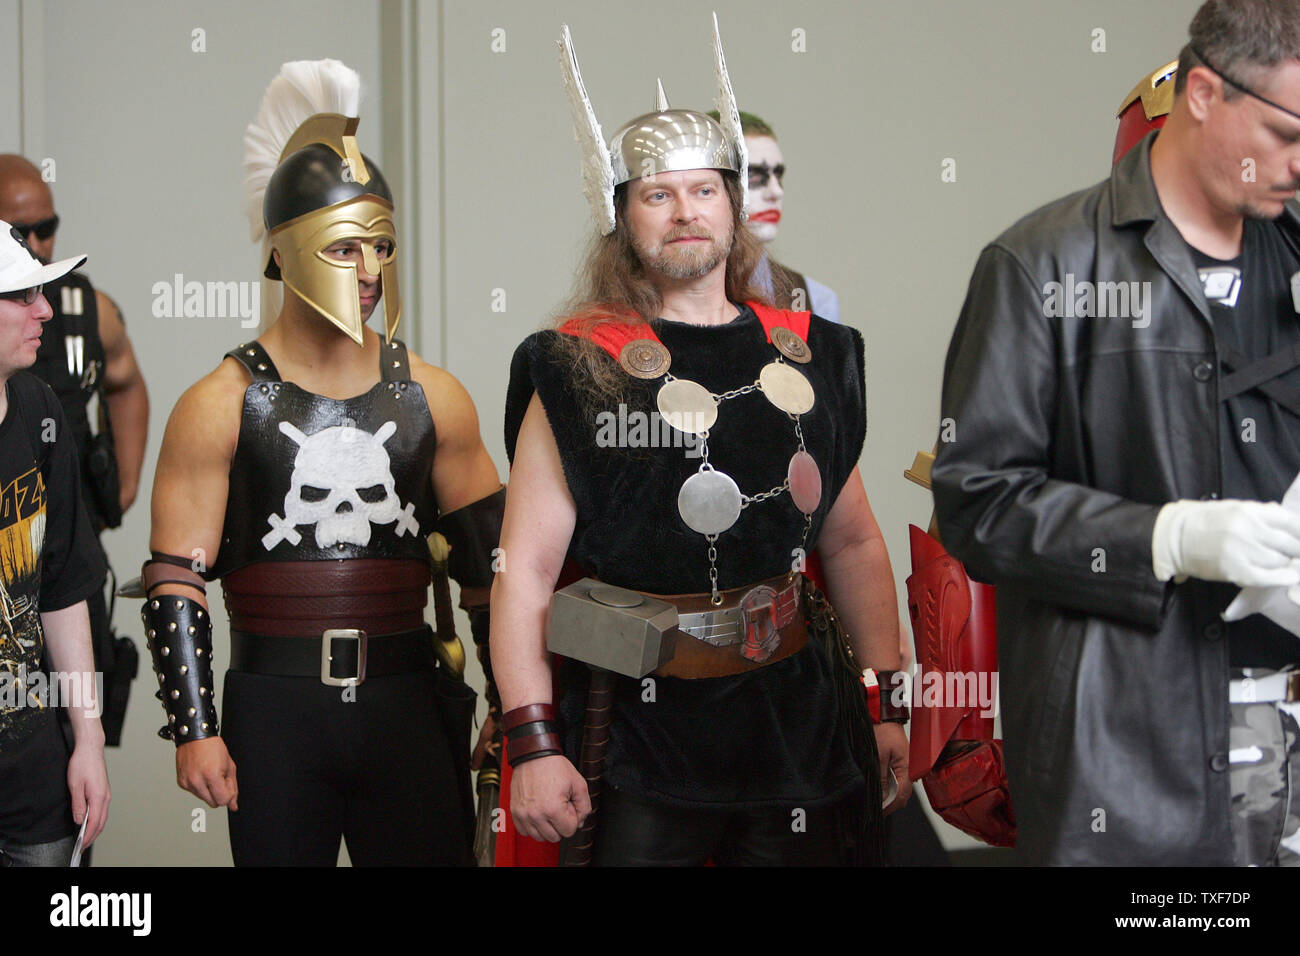 David Santiago (L) as Ares, God of War, and Garrett Gird, as Thor, wait with others to be judged for the costume contest at the 11th annual Comic Con in Baltimore on August 29, 2010.  Over 100 contestants showed off their best impressions of comic book heros and villains on costume contest day.   UPI/Greg Whitesell Stock Photo